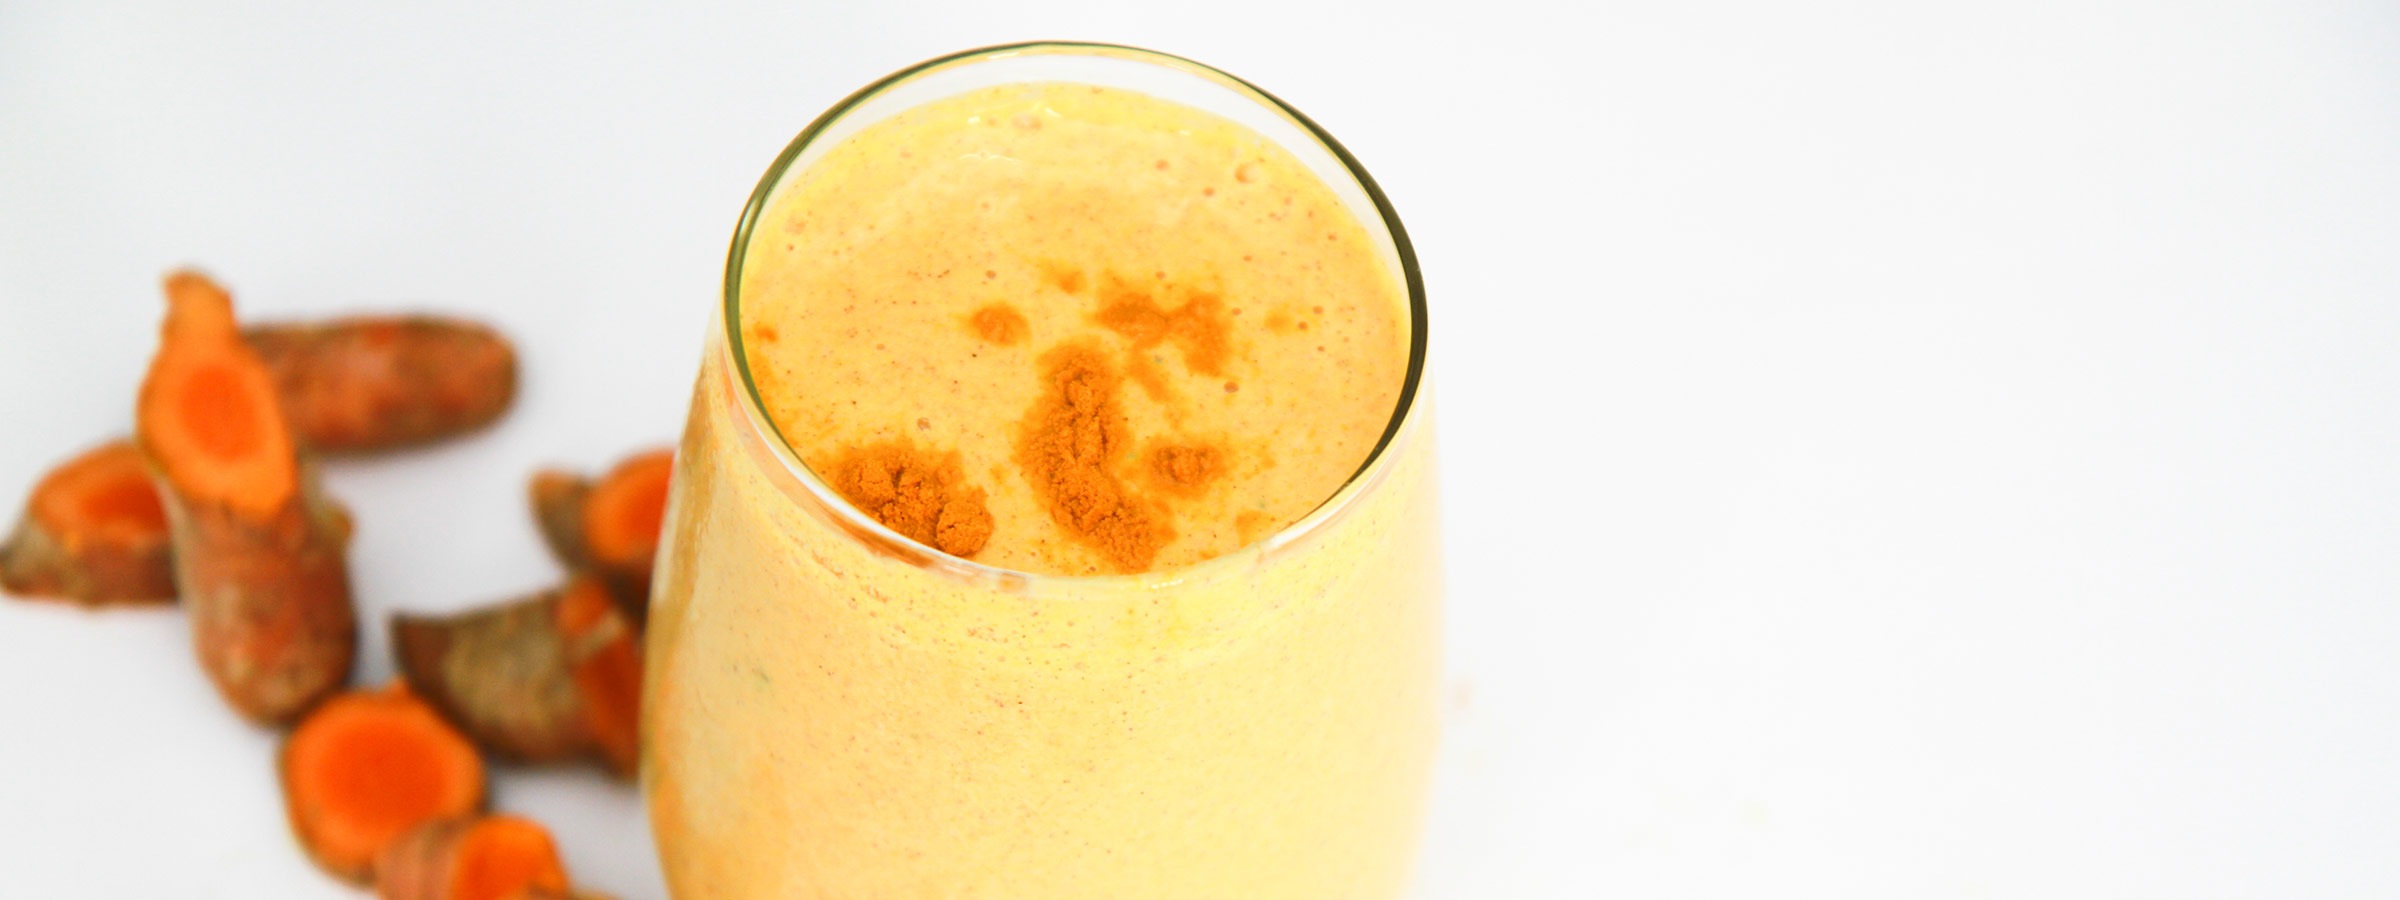 A tall, skinny drinking glass filled with a Creamy Vanilla Turmeric Smoothie.